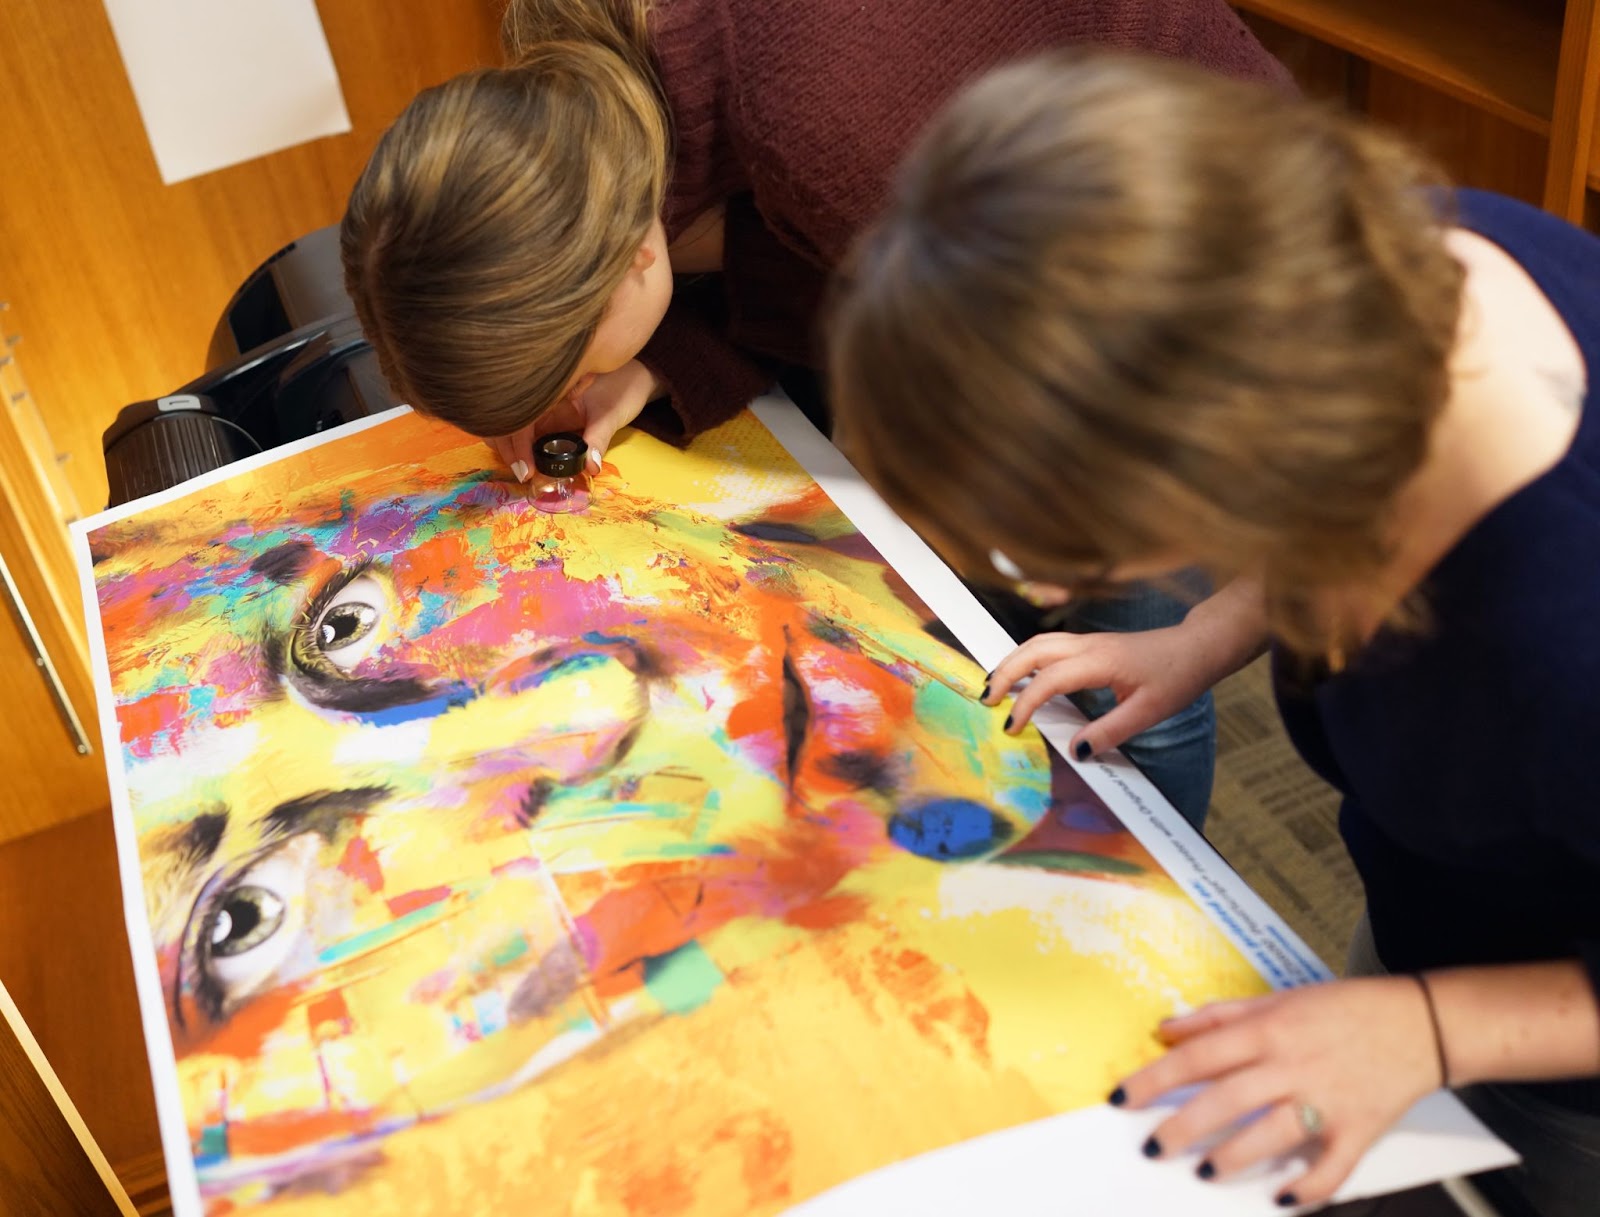 two people looking closely at a painting of a face